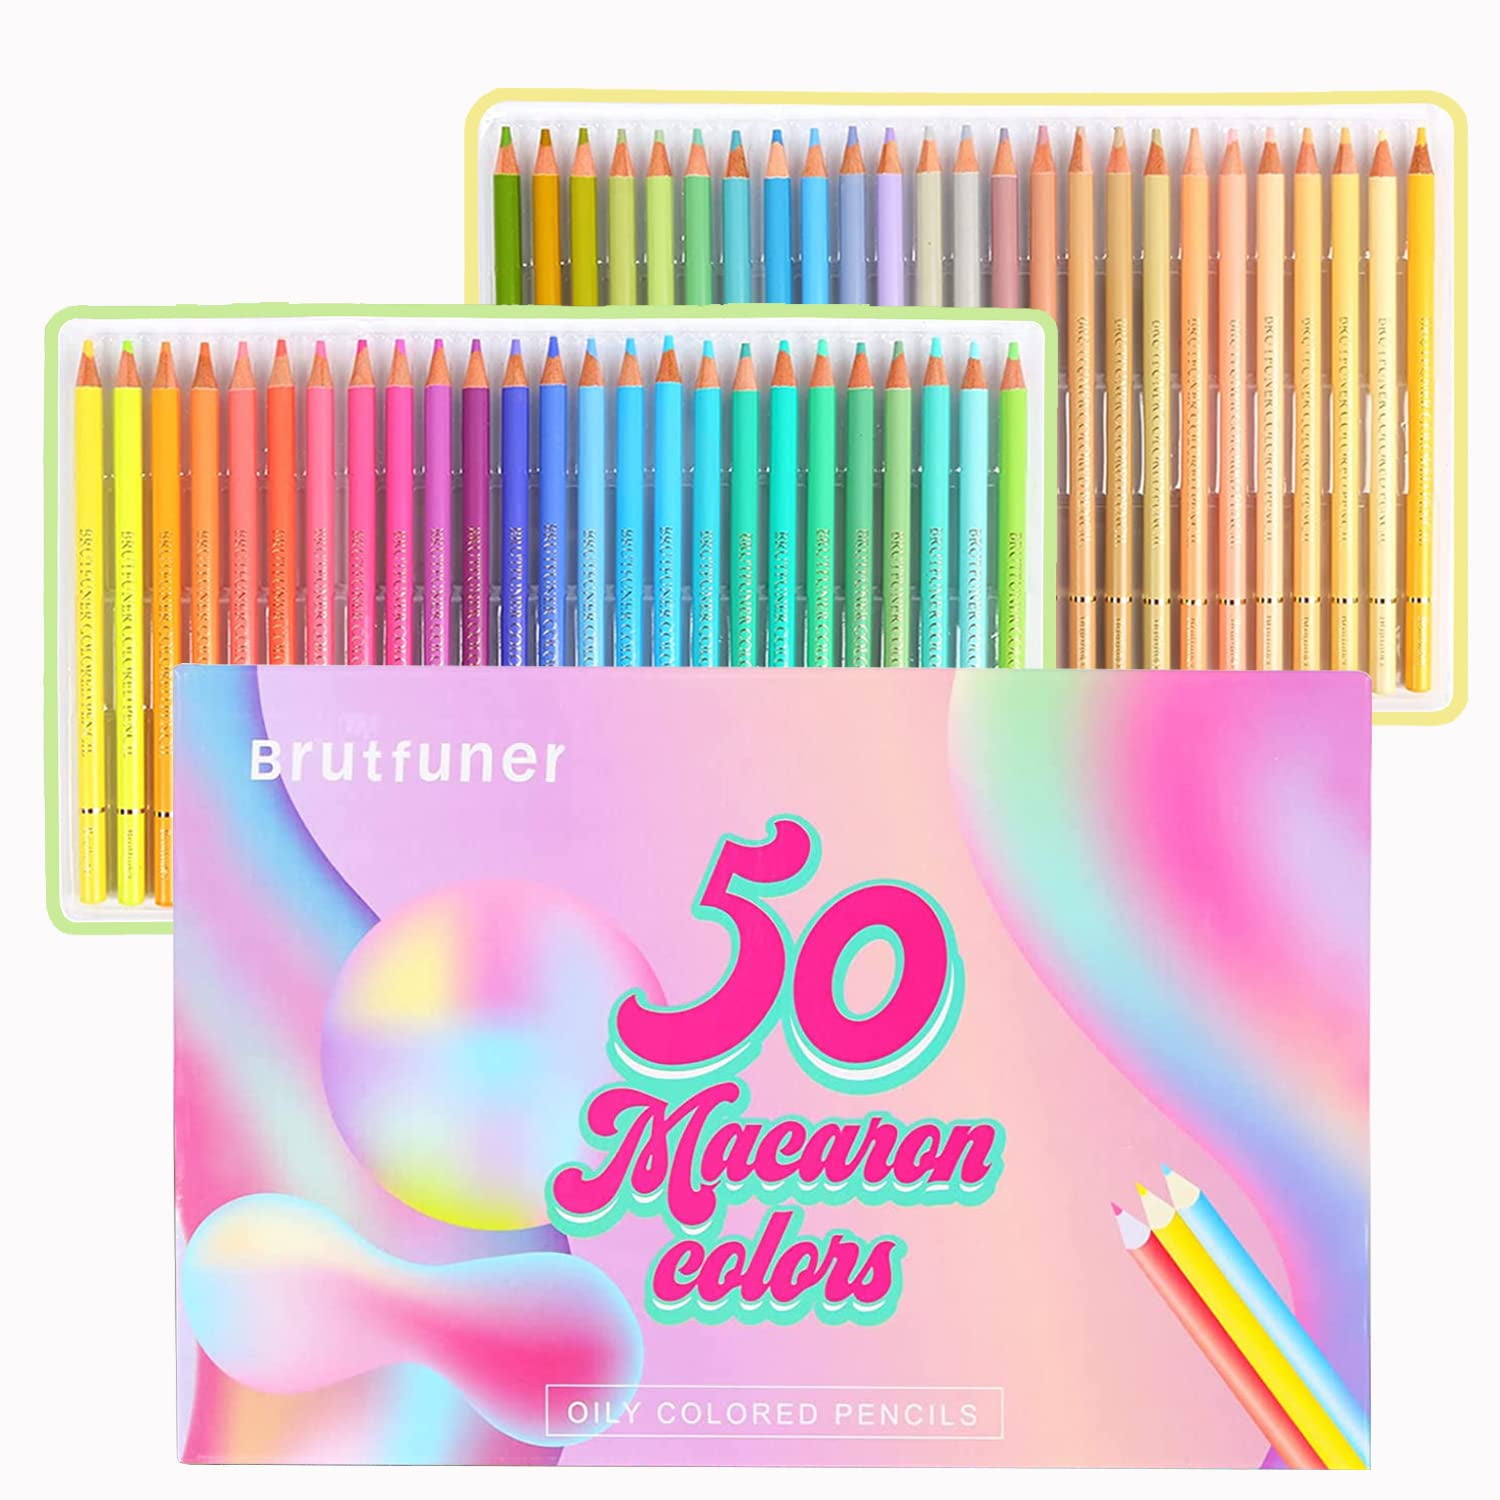 Toorise Count Oil Colored Pencils Set for Adults Macaron Colored